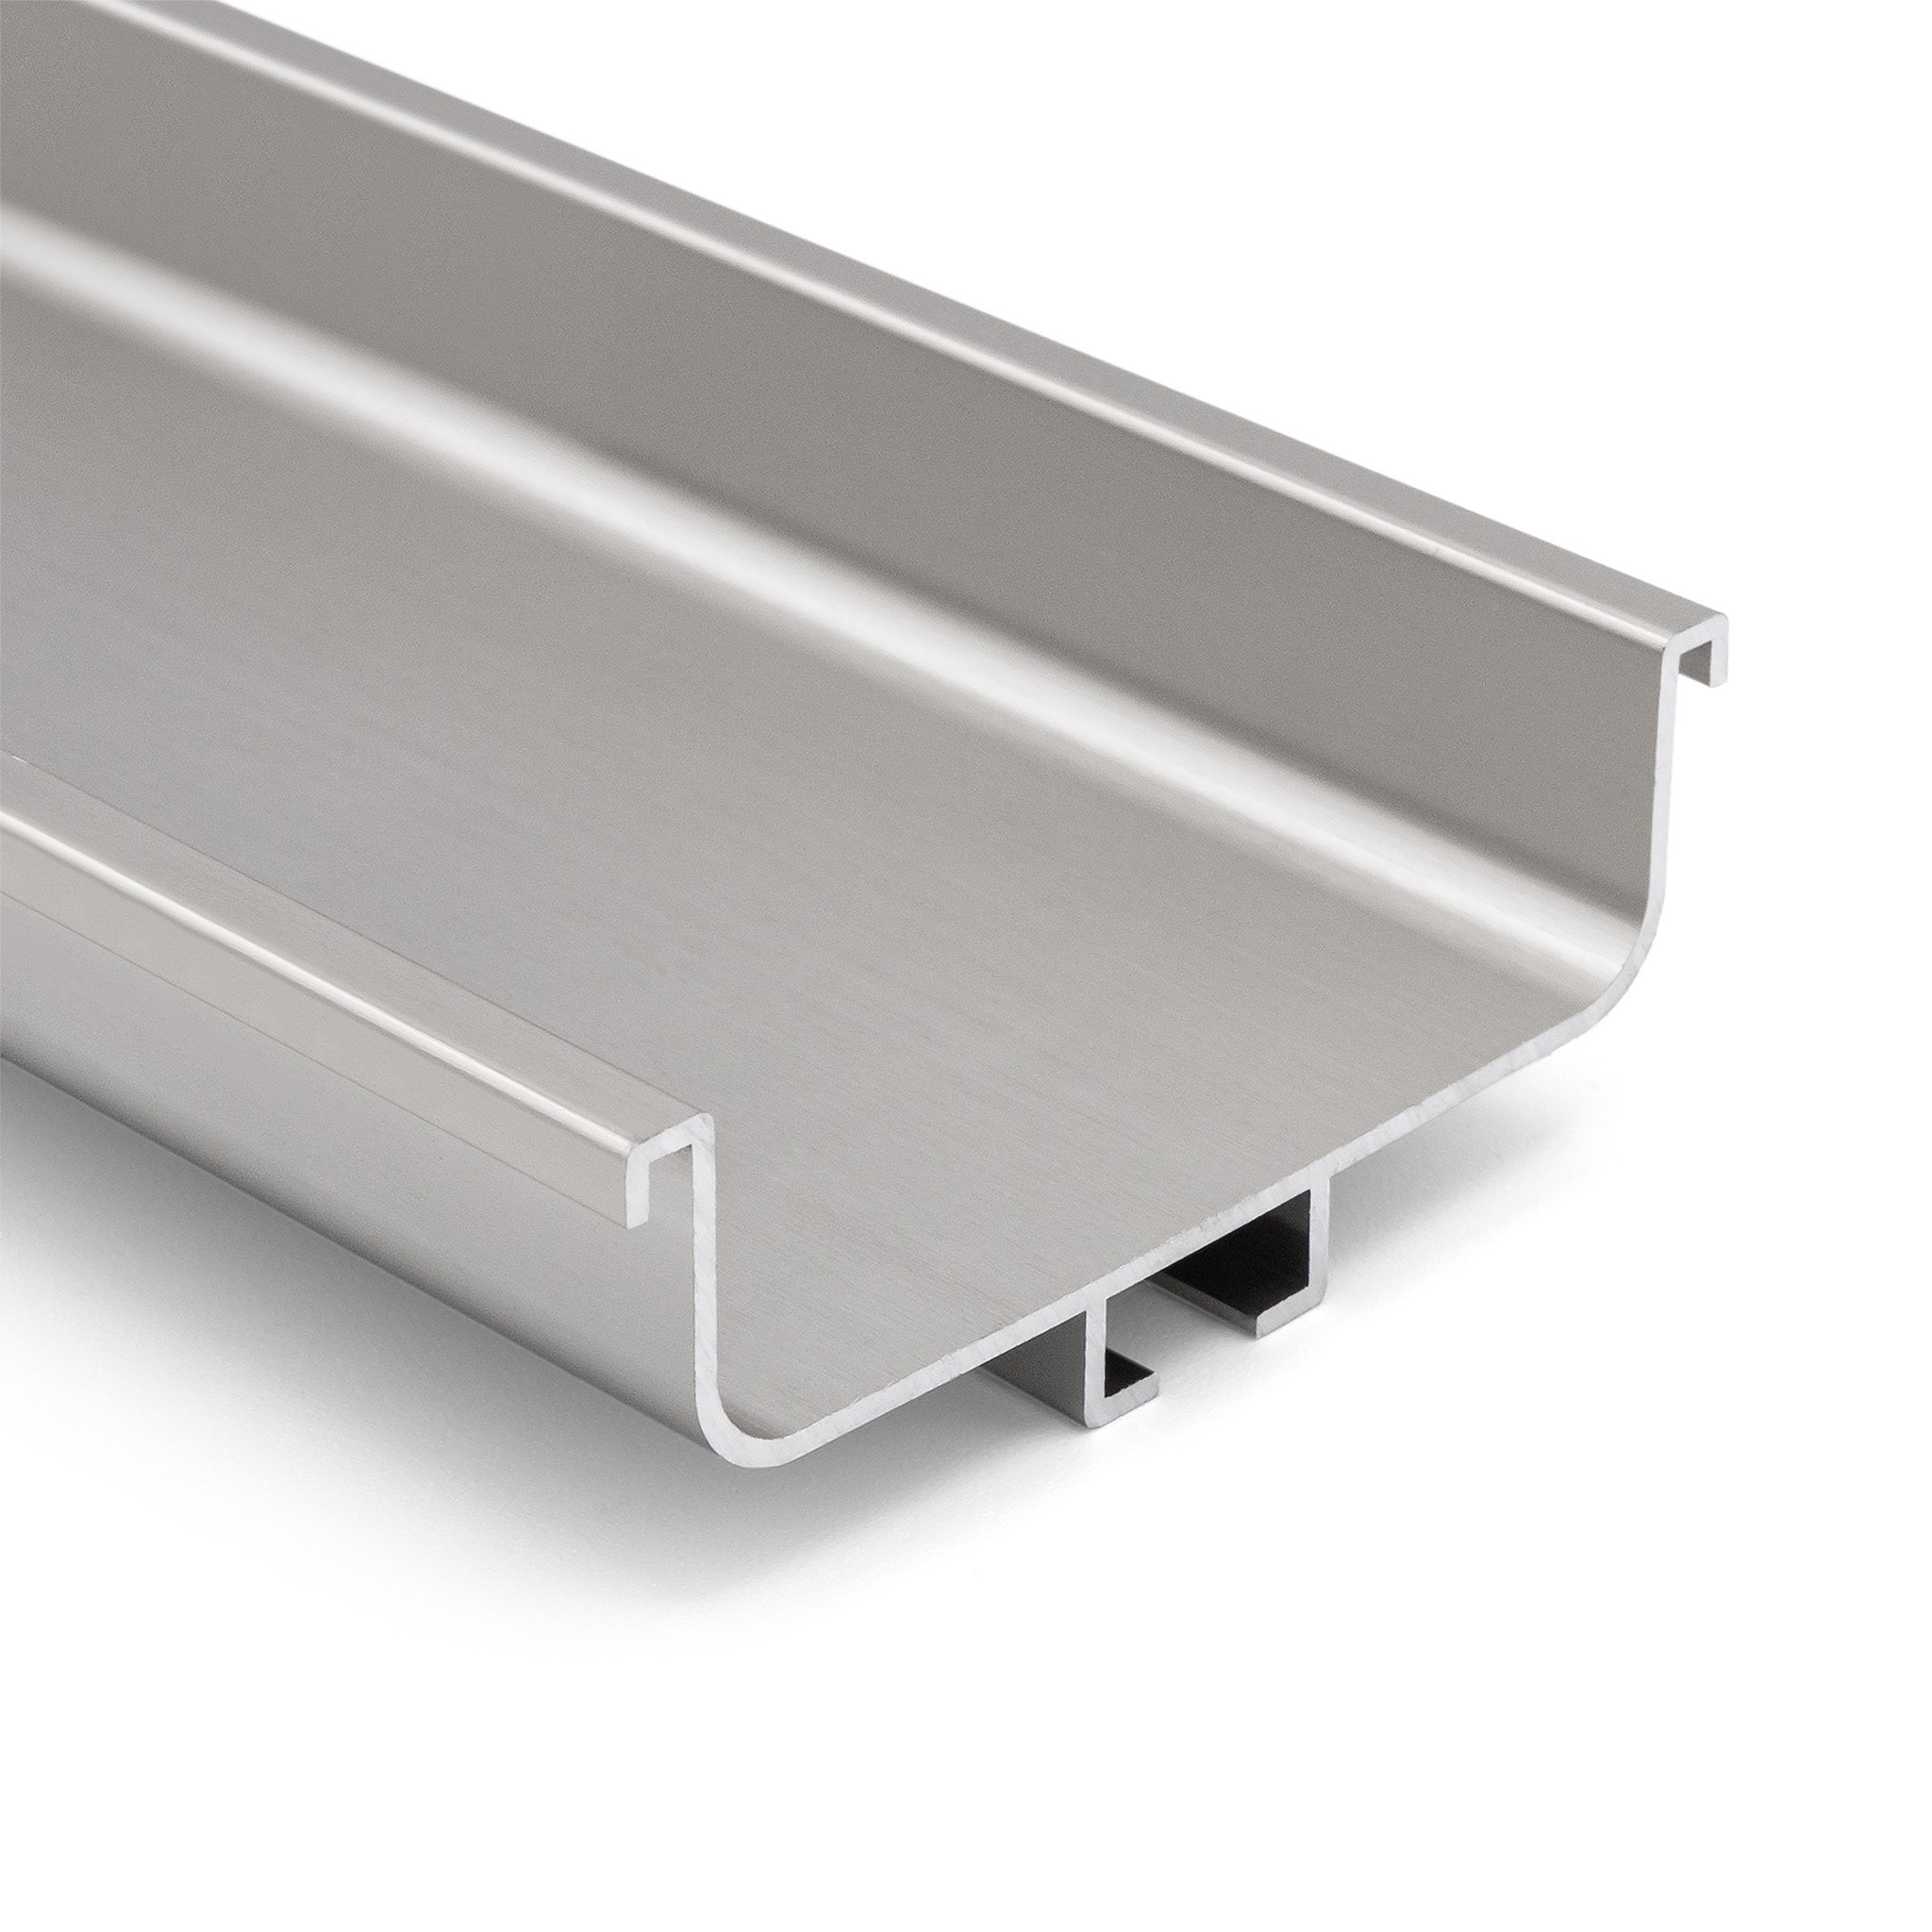 Laguna Gola Profile C-Shape, for Between Drawers, 3m, Stainless